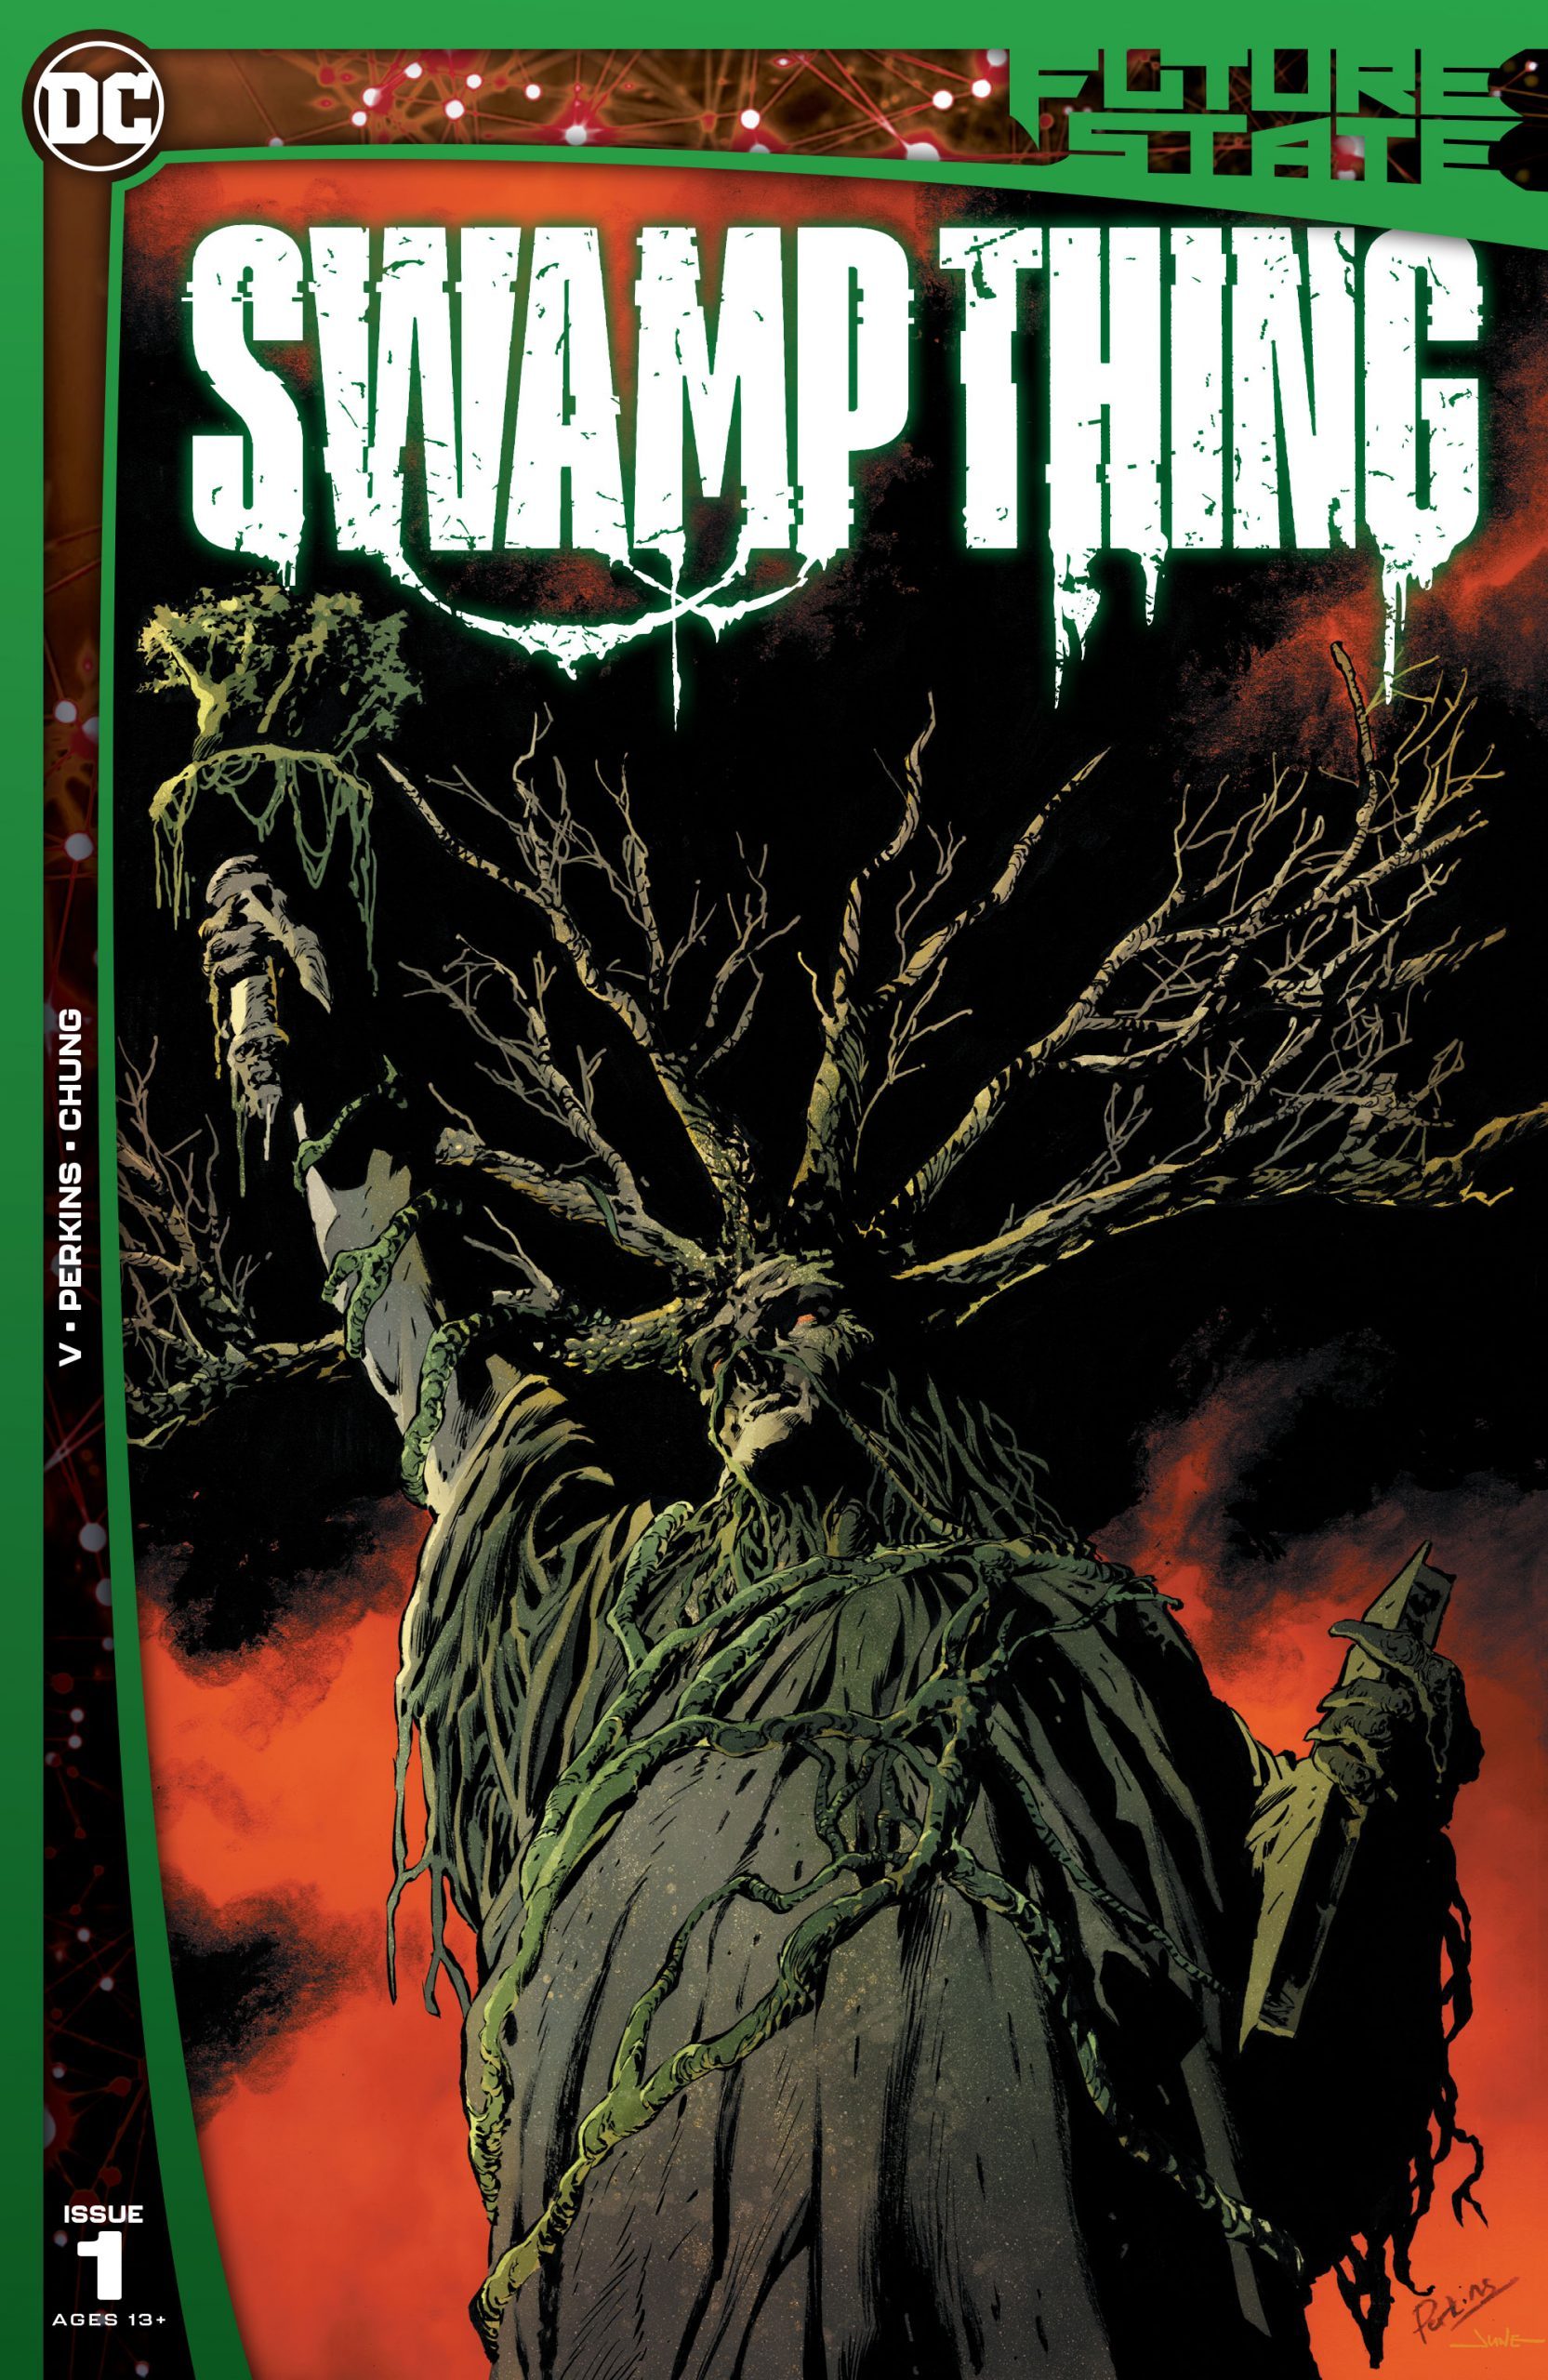 Swamp Thing has taken over the Statue of Liberty. His branches jut out of its crown and vines wrap its base. Cover art by Mike Perkins. 